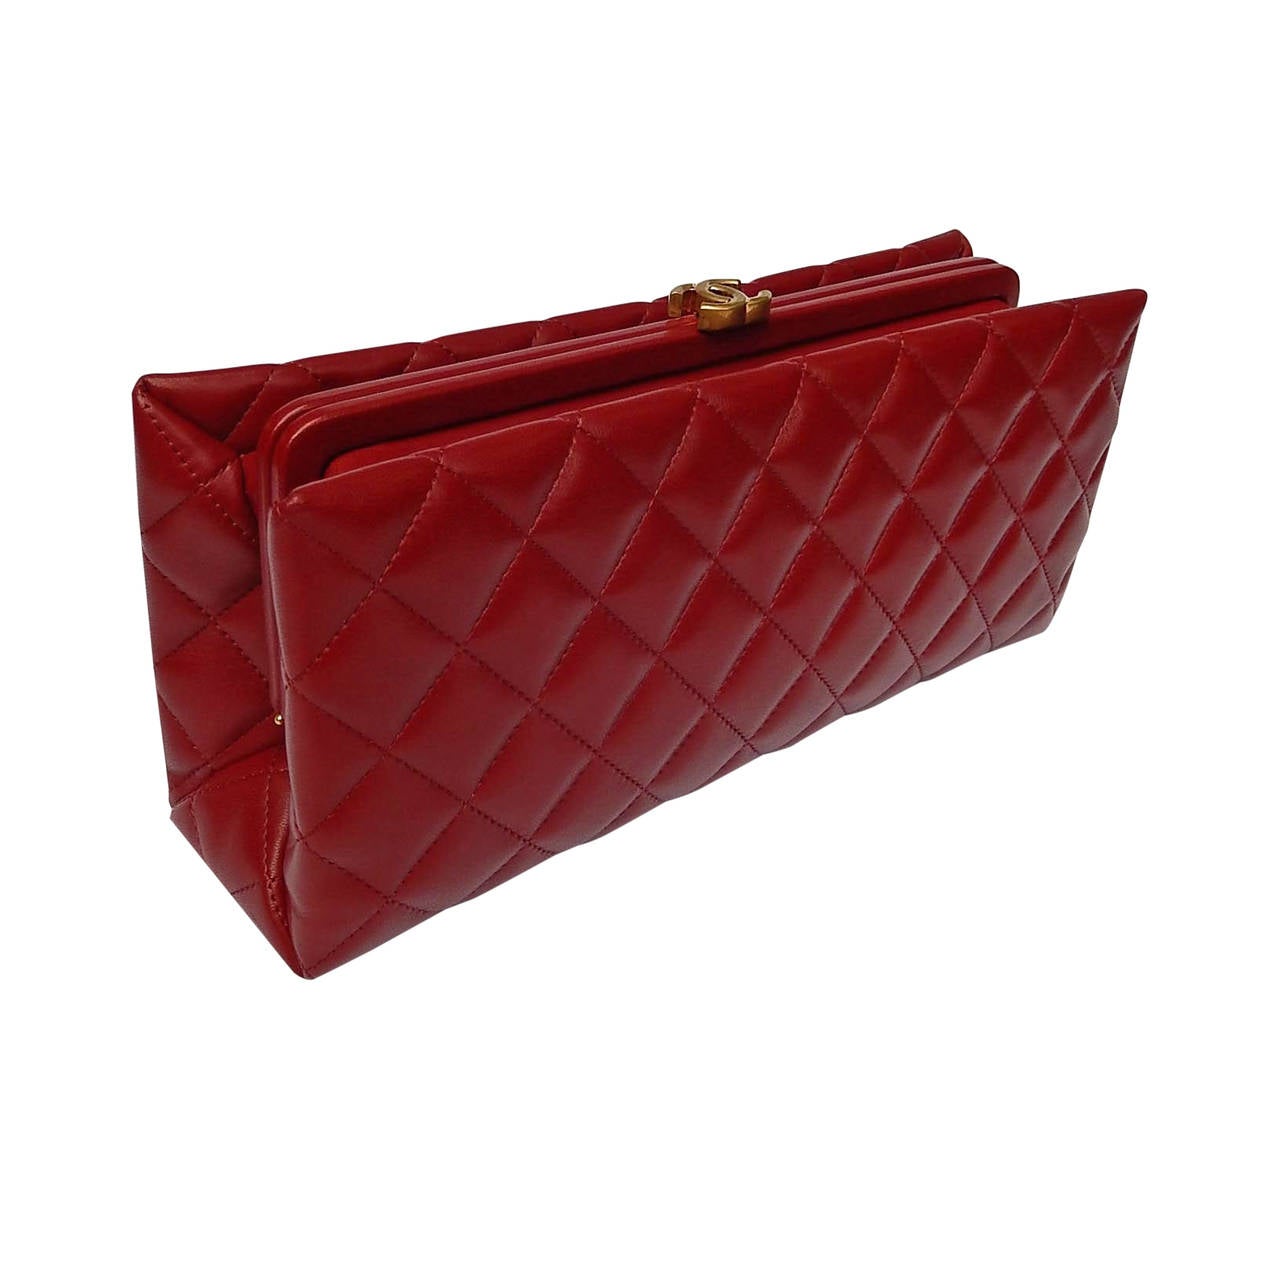 Chanel New Red Lambskin Leather Clutch with CC Gold Top Lock For Sale